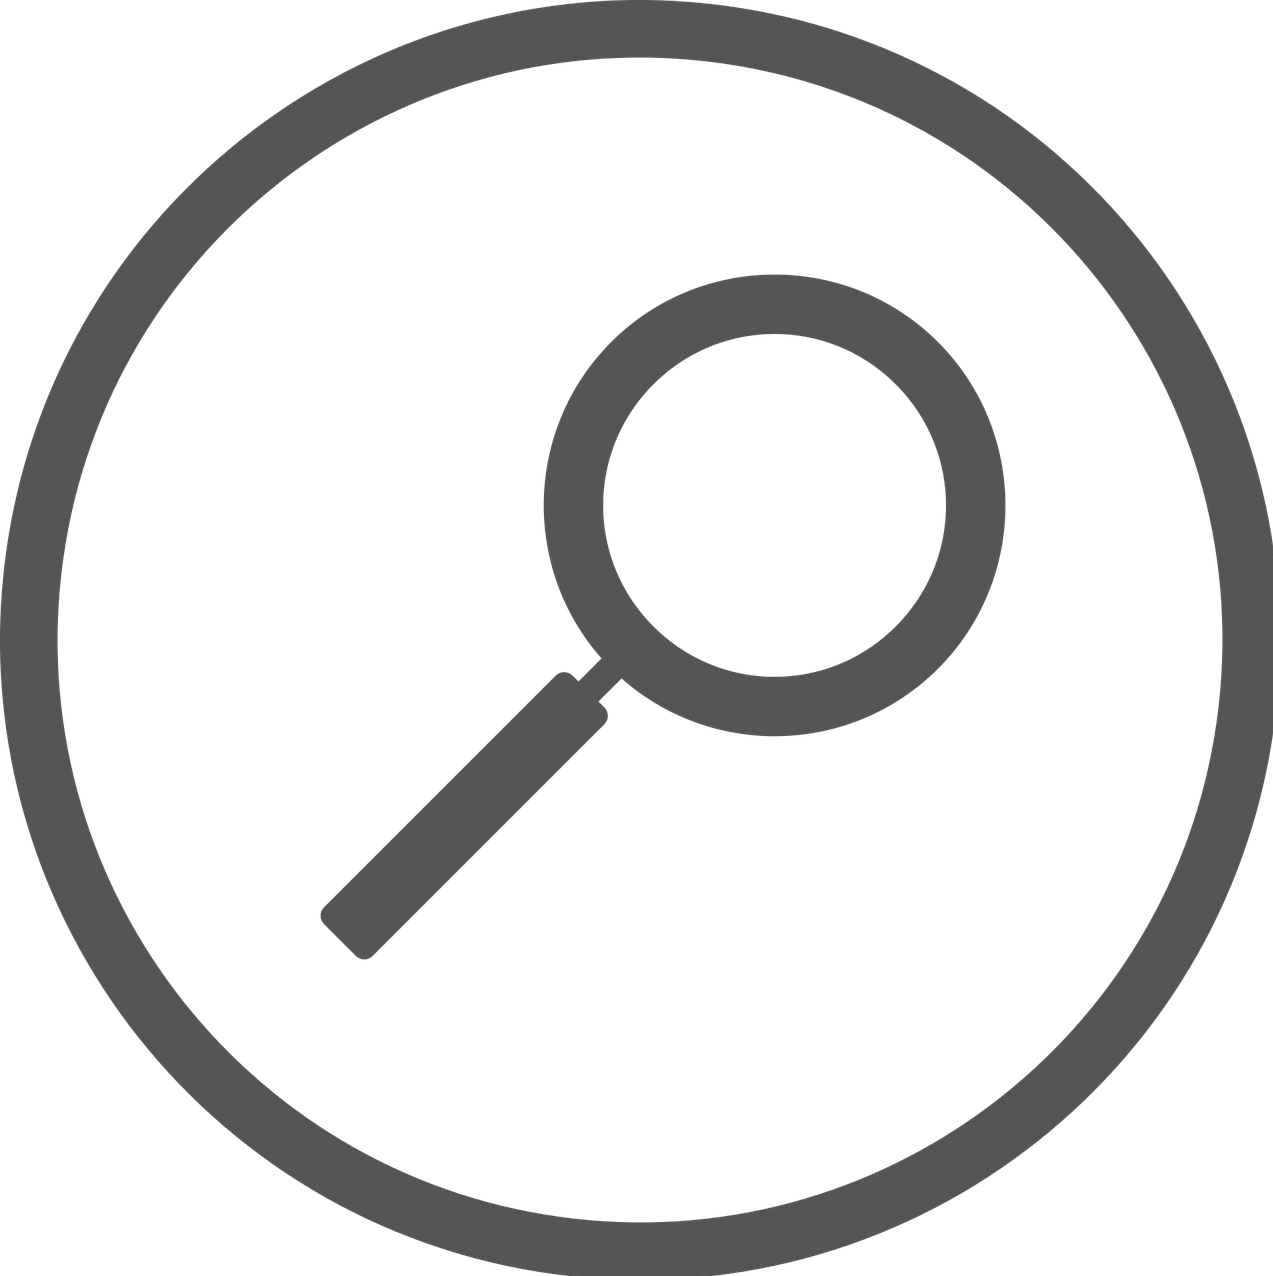 decorative magnifying glass icon